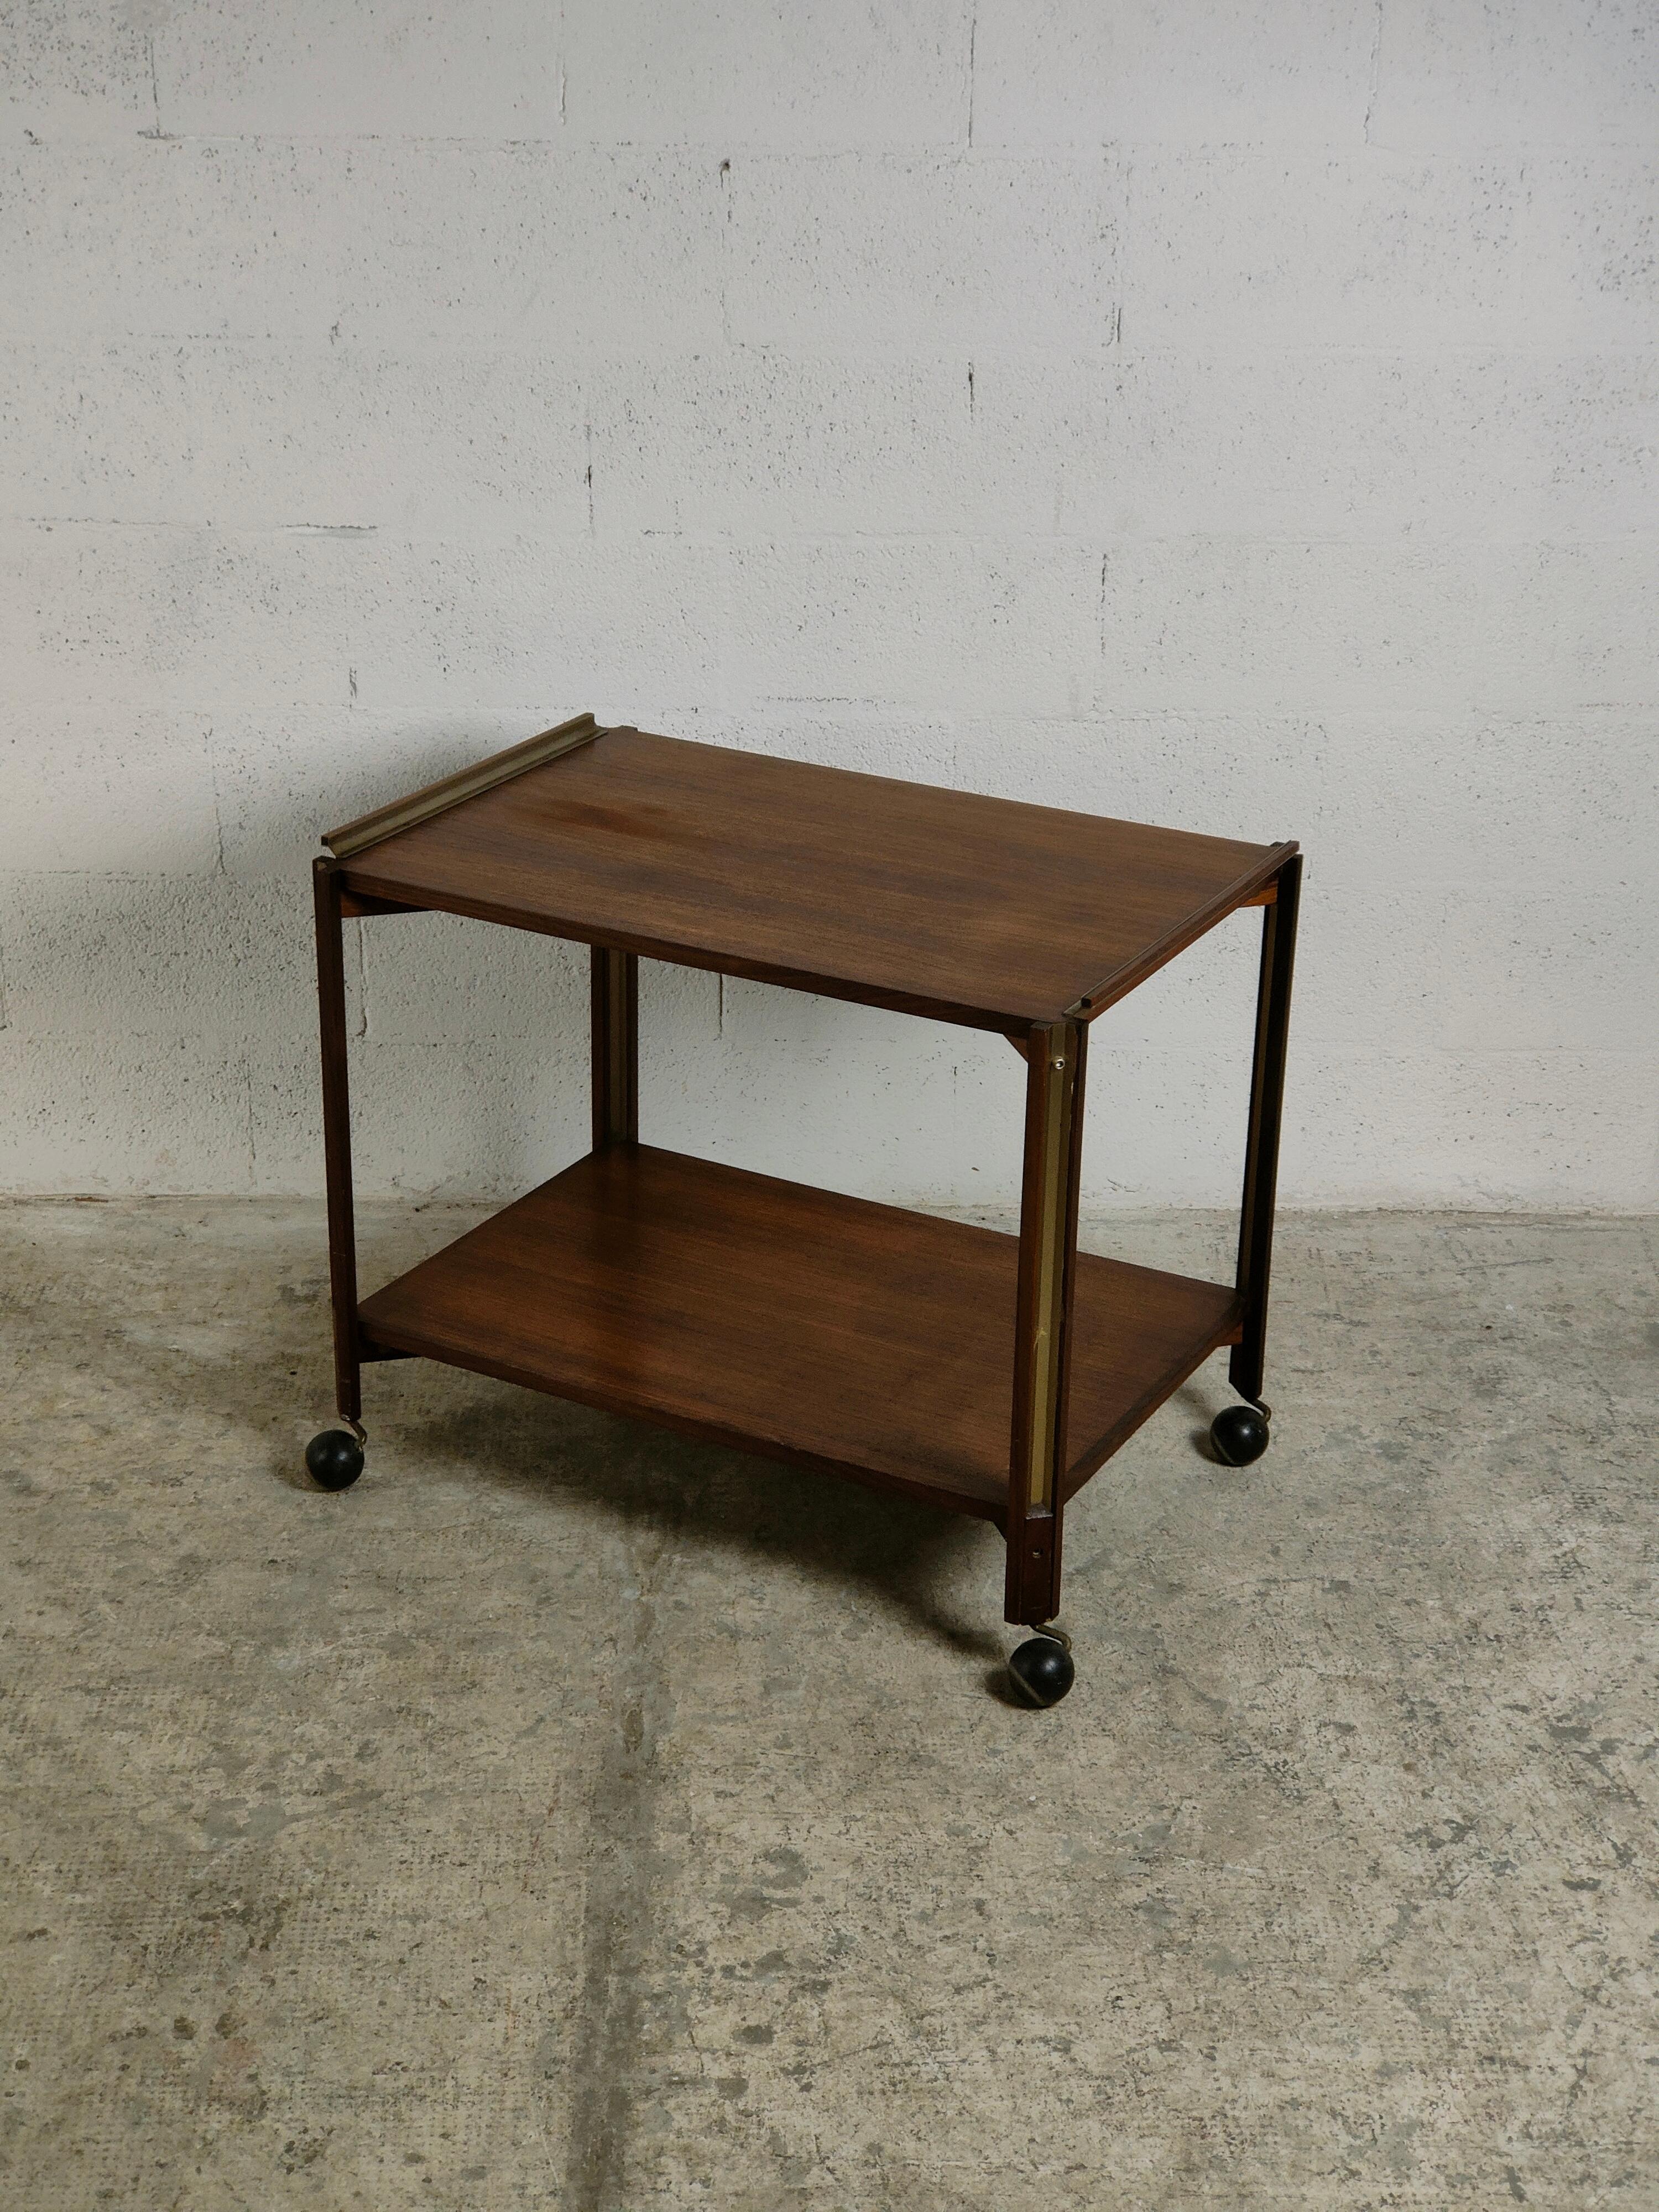 A mix of style refinement and elegance for this two-shelf food trolley designed by Ico Parisi for Stildomous in the 1960s.
Wooden and parts in nickel-plated brass.
Signed under the shelves.
Really good condition.

Domenico Parisi, nicknamed Ico, was